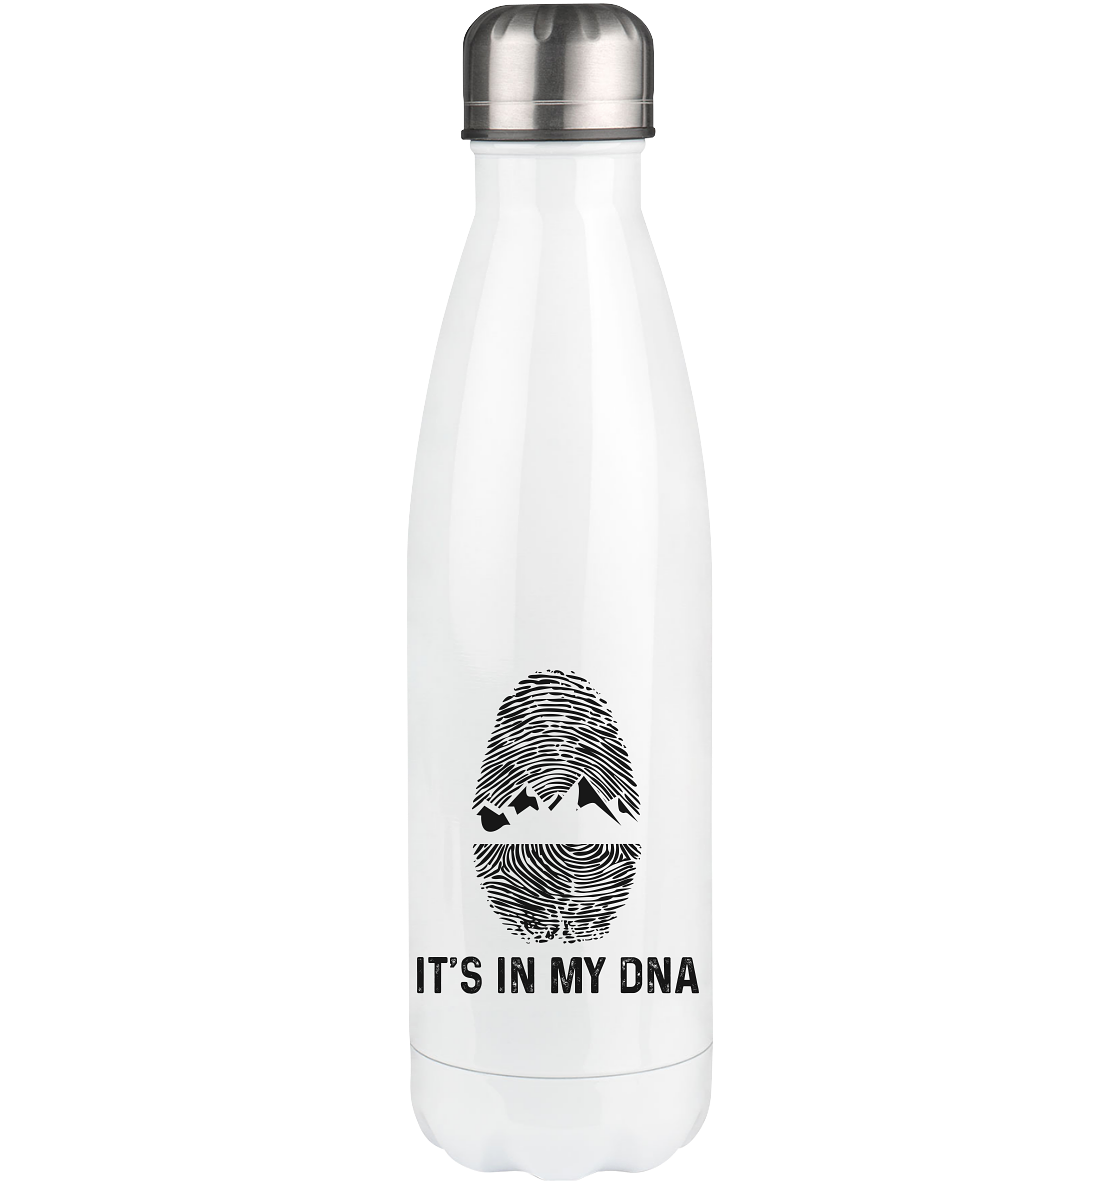 It's In My DNA - Edelstahl Thermosflasche berge 500ml